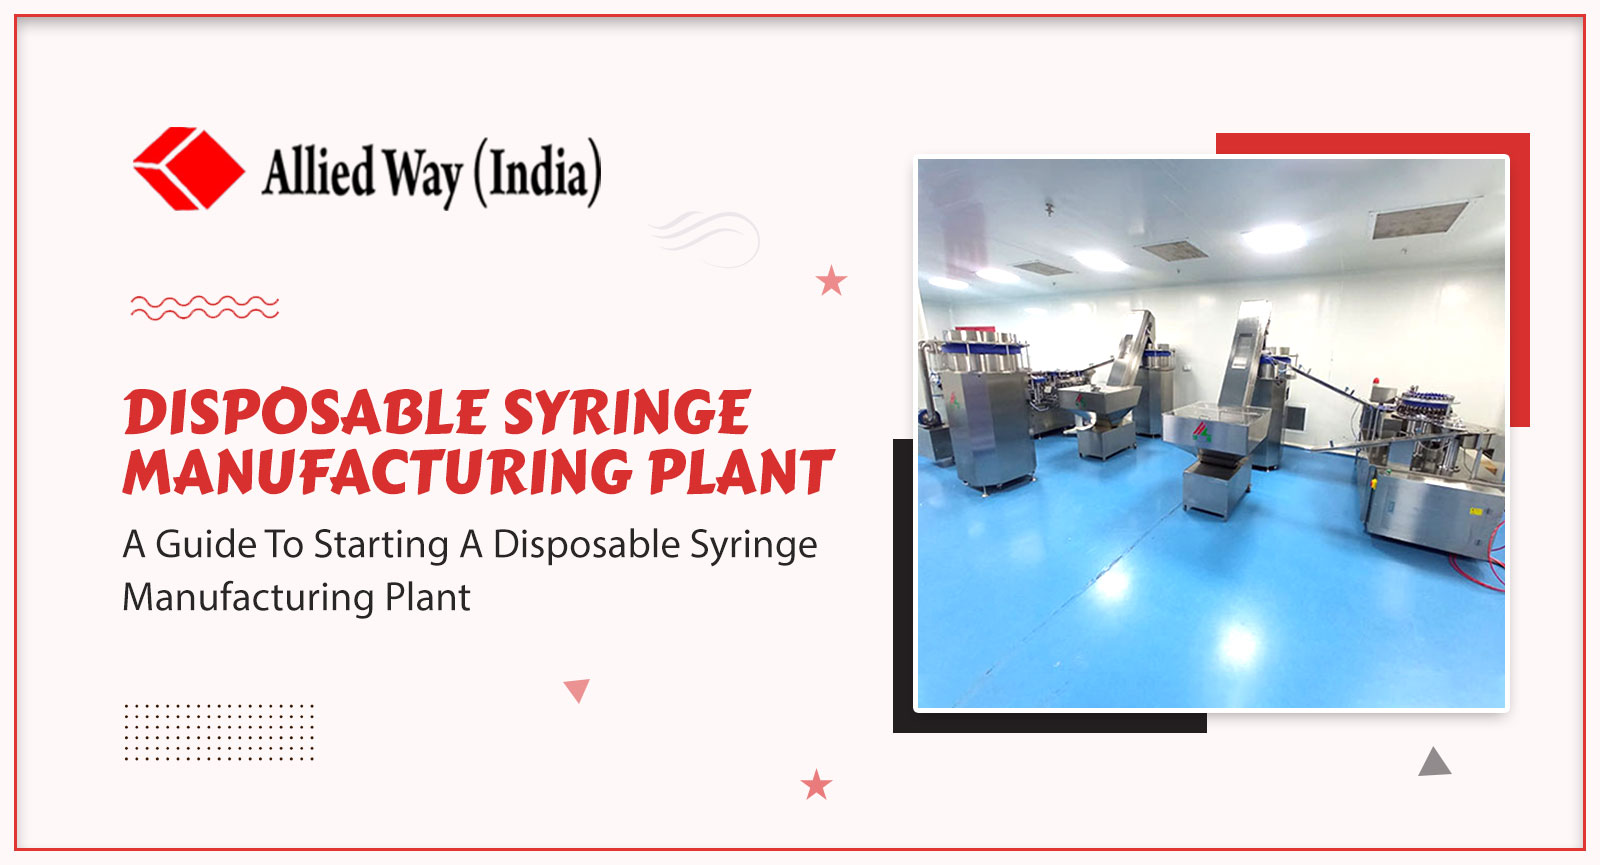 A Guide To Starting A Disposable Syringe Manufacturing Plant, Allied Way (India)